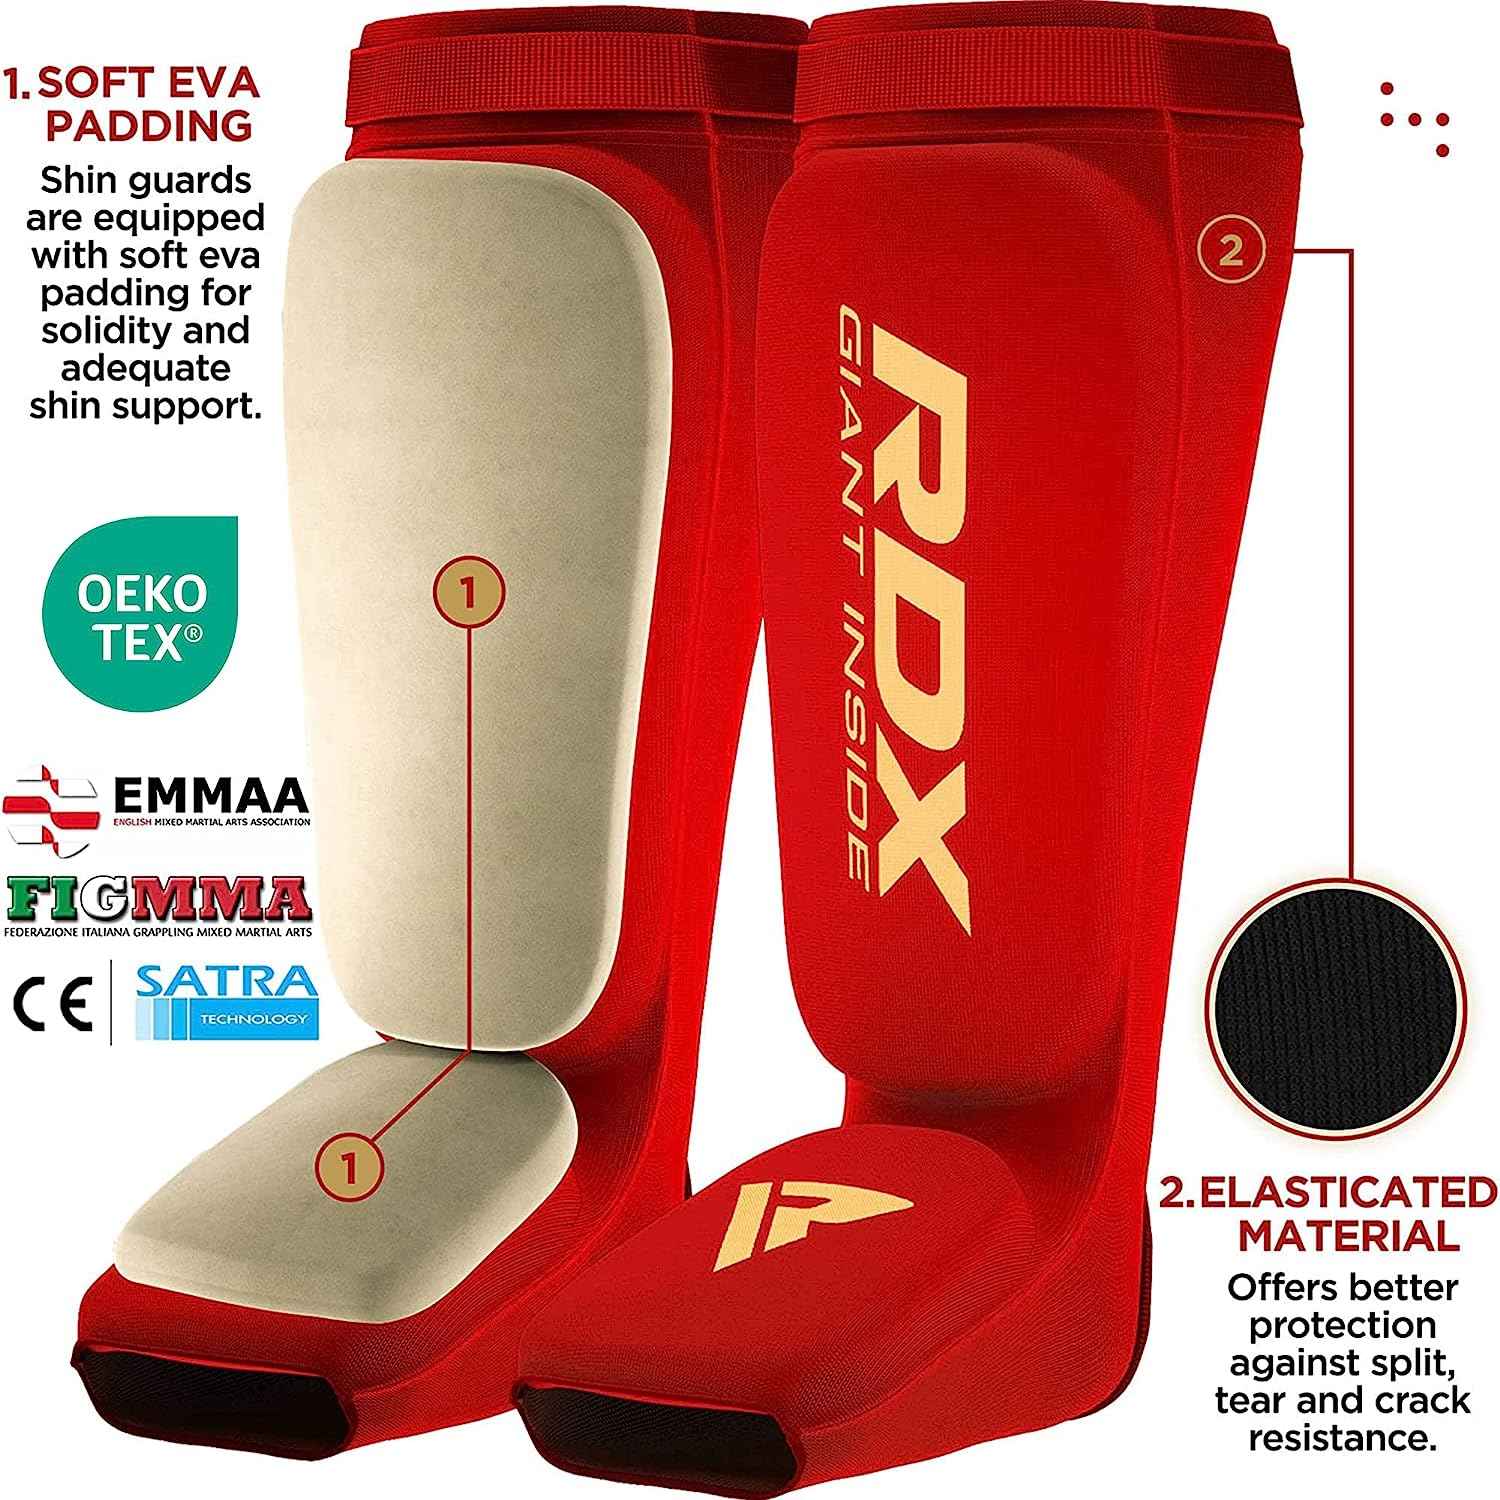 RDX SI Gel Padded Shin Guards Leg Instep Protection Pads for MMA, BJJ, Kickboxing, Muay Thai, Training - RED - LARGE - Pro-Distributing